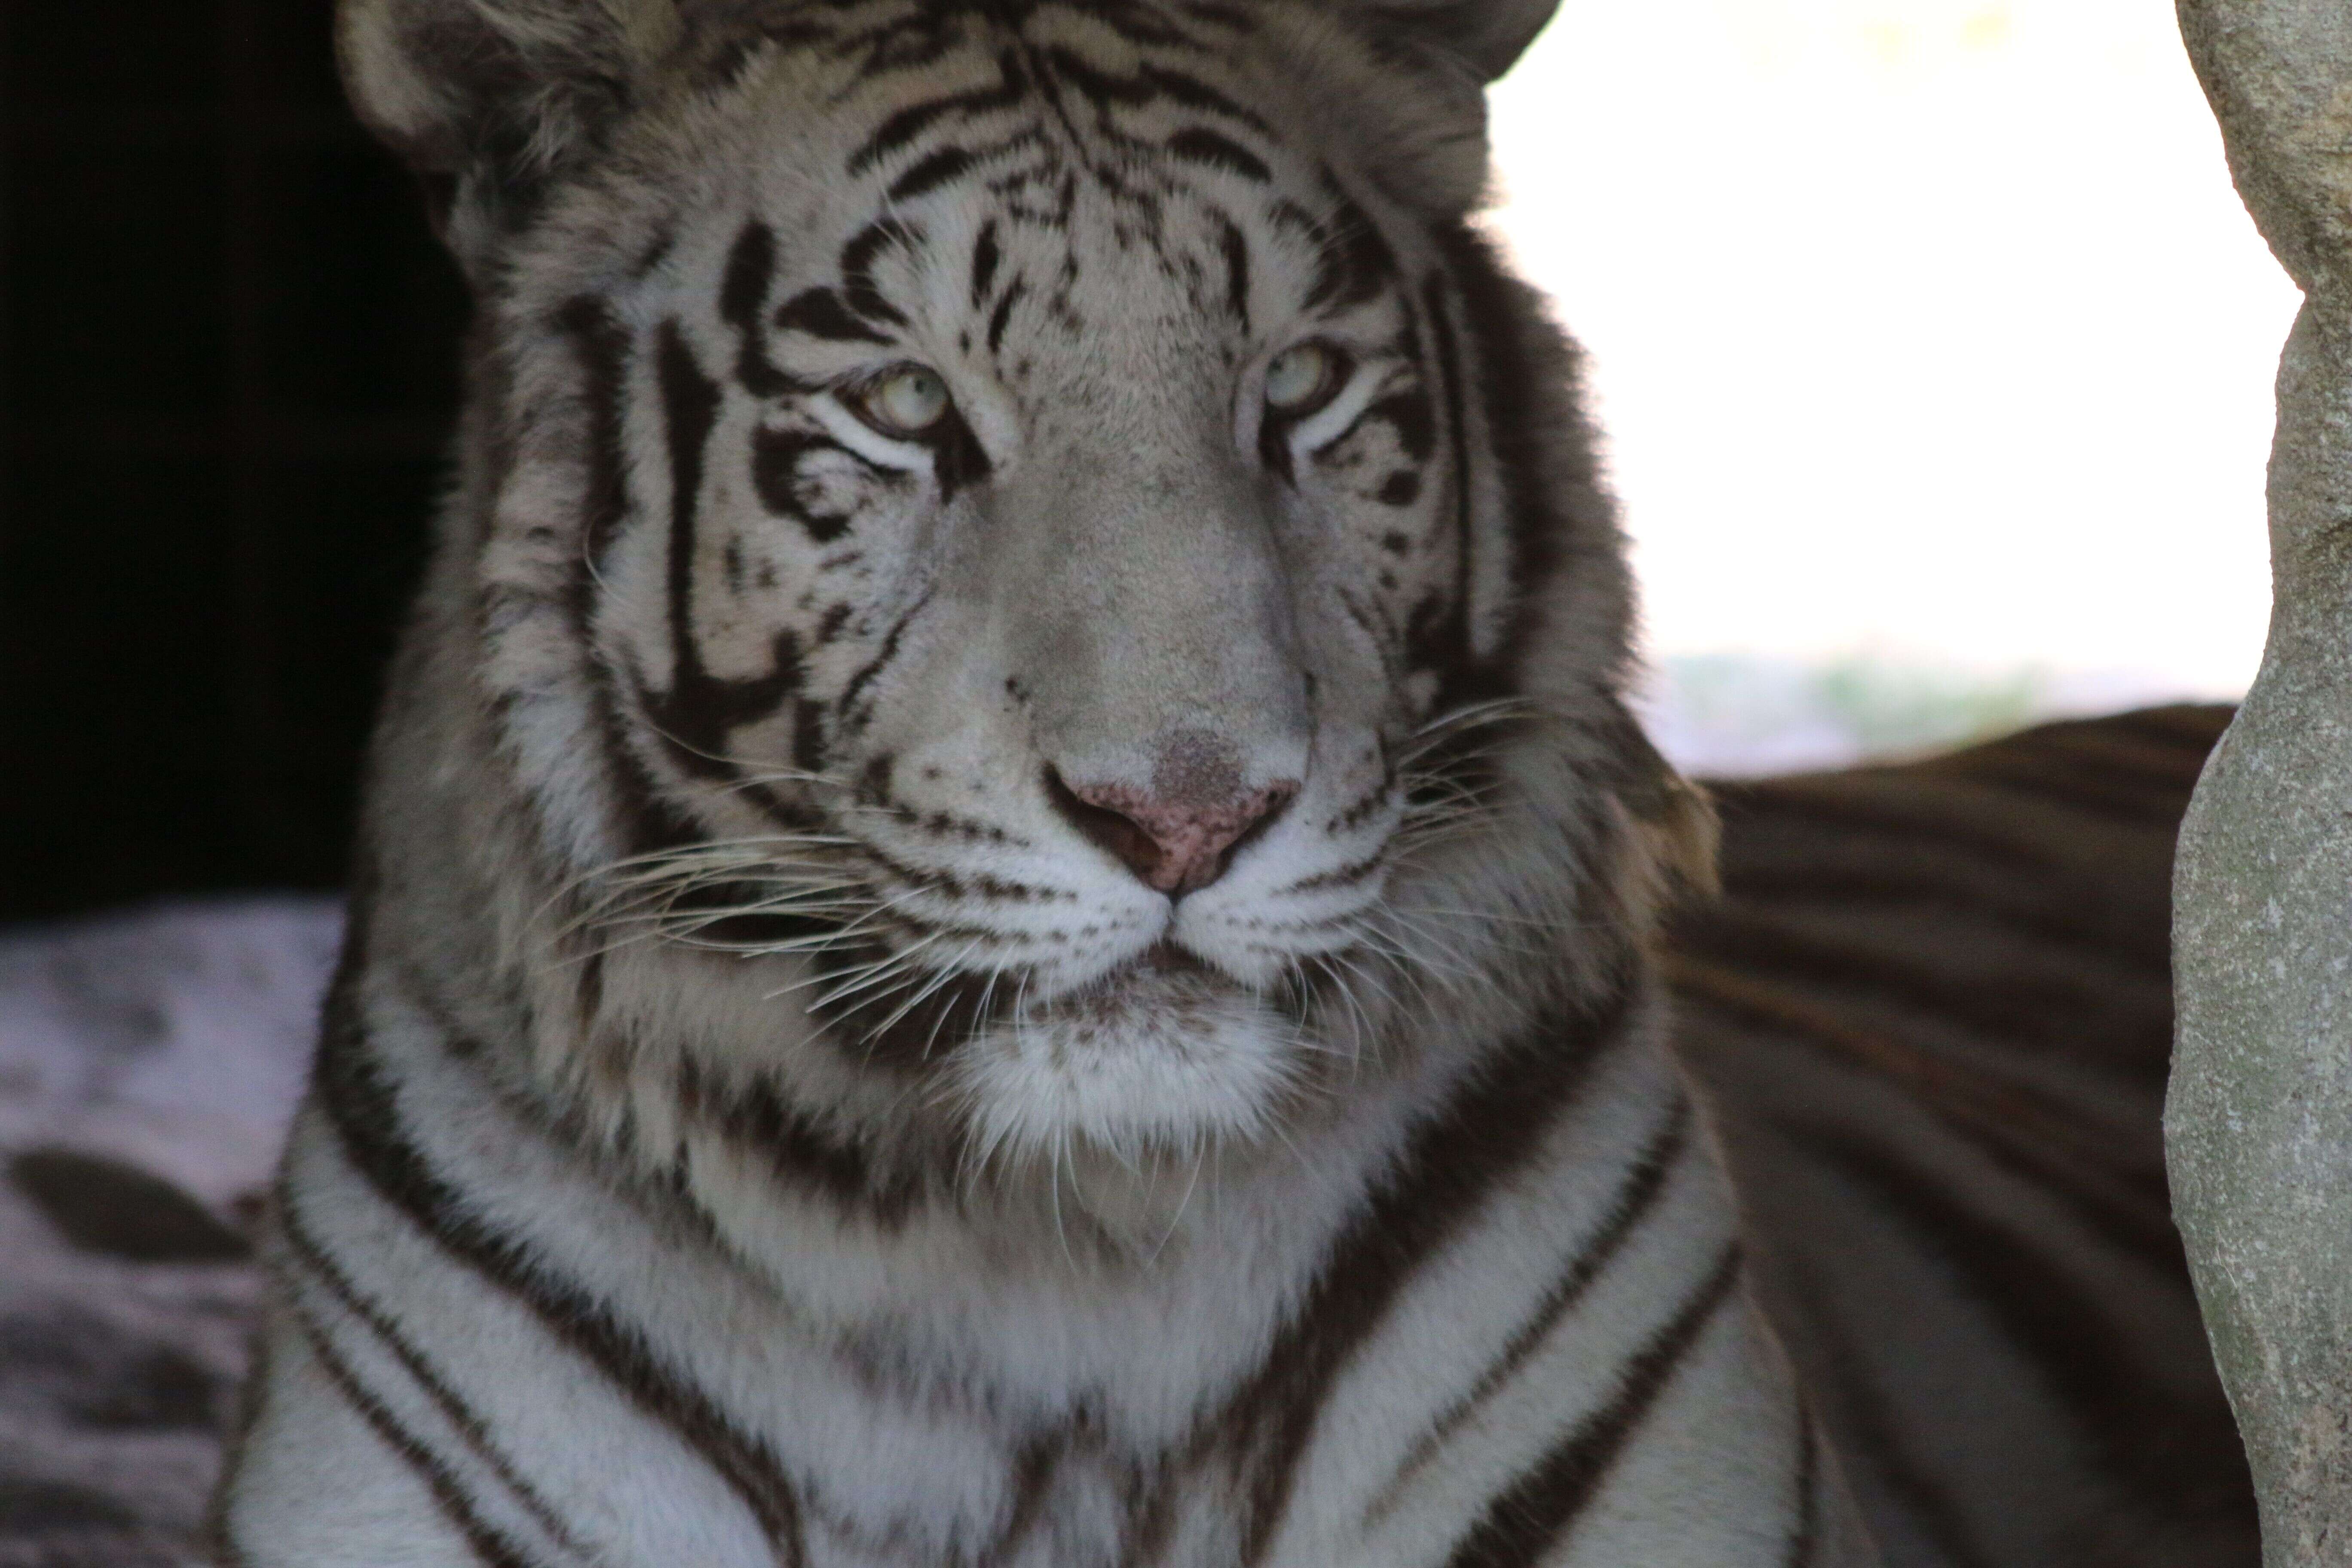 Rescued white tiger Sapphire at Florida sanctuary